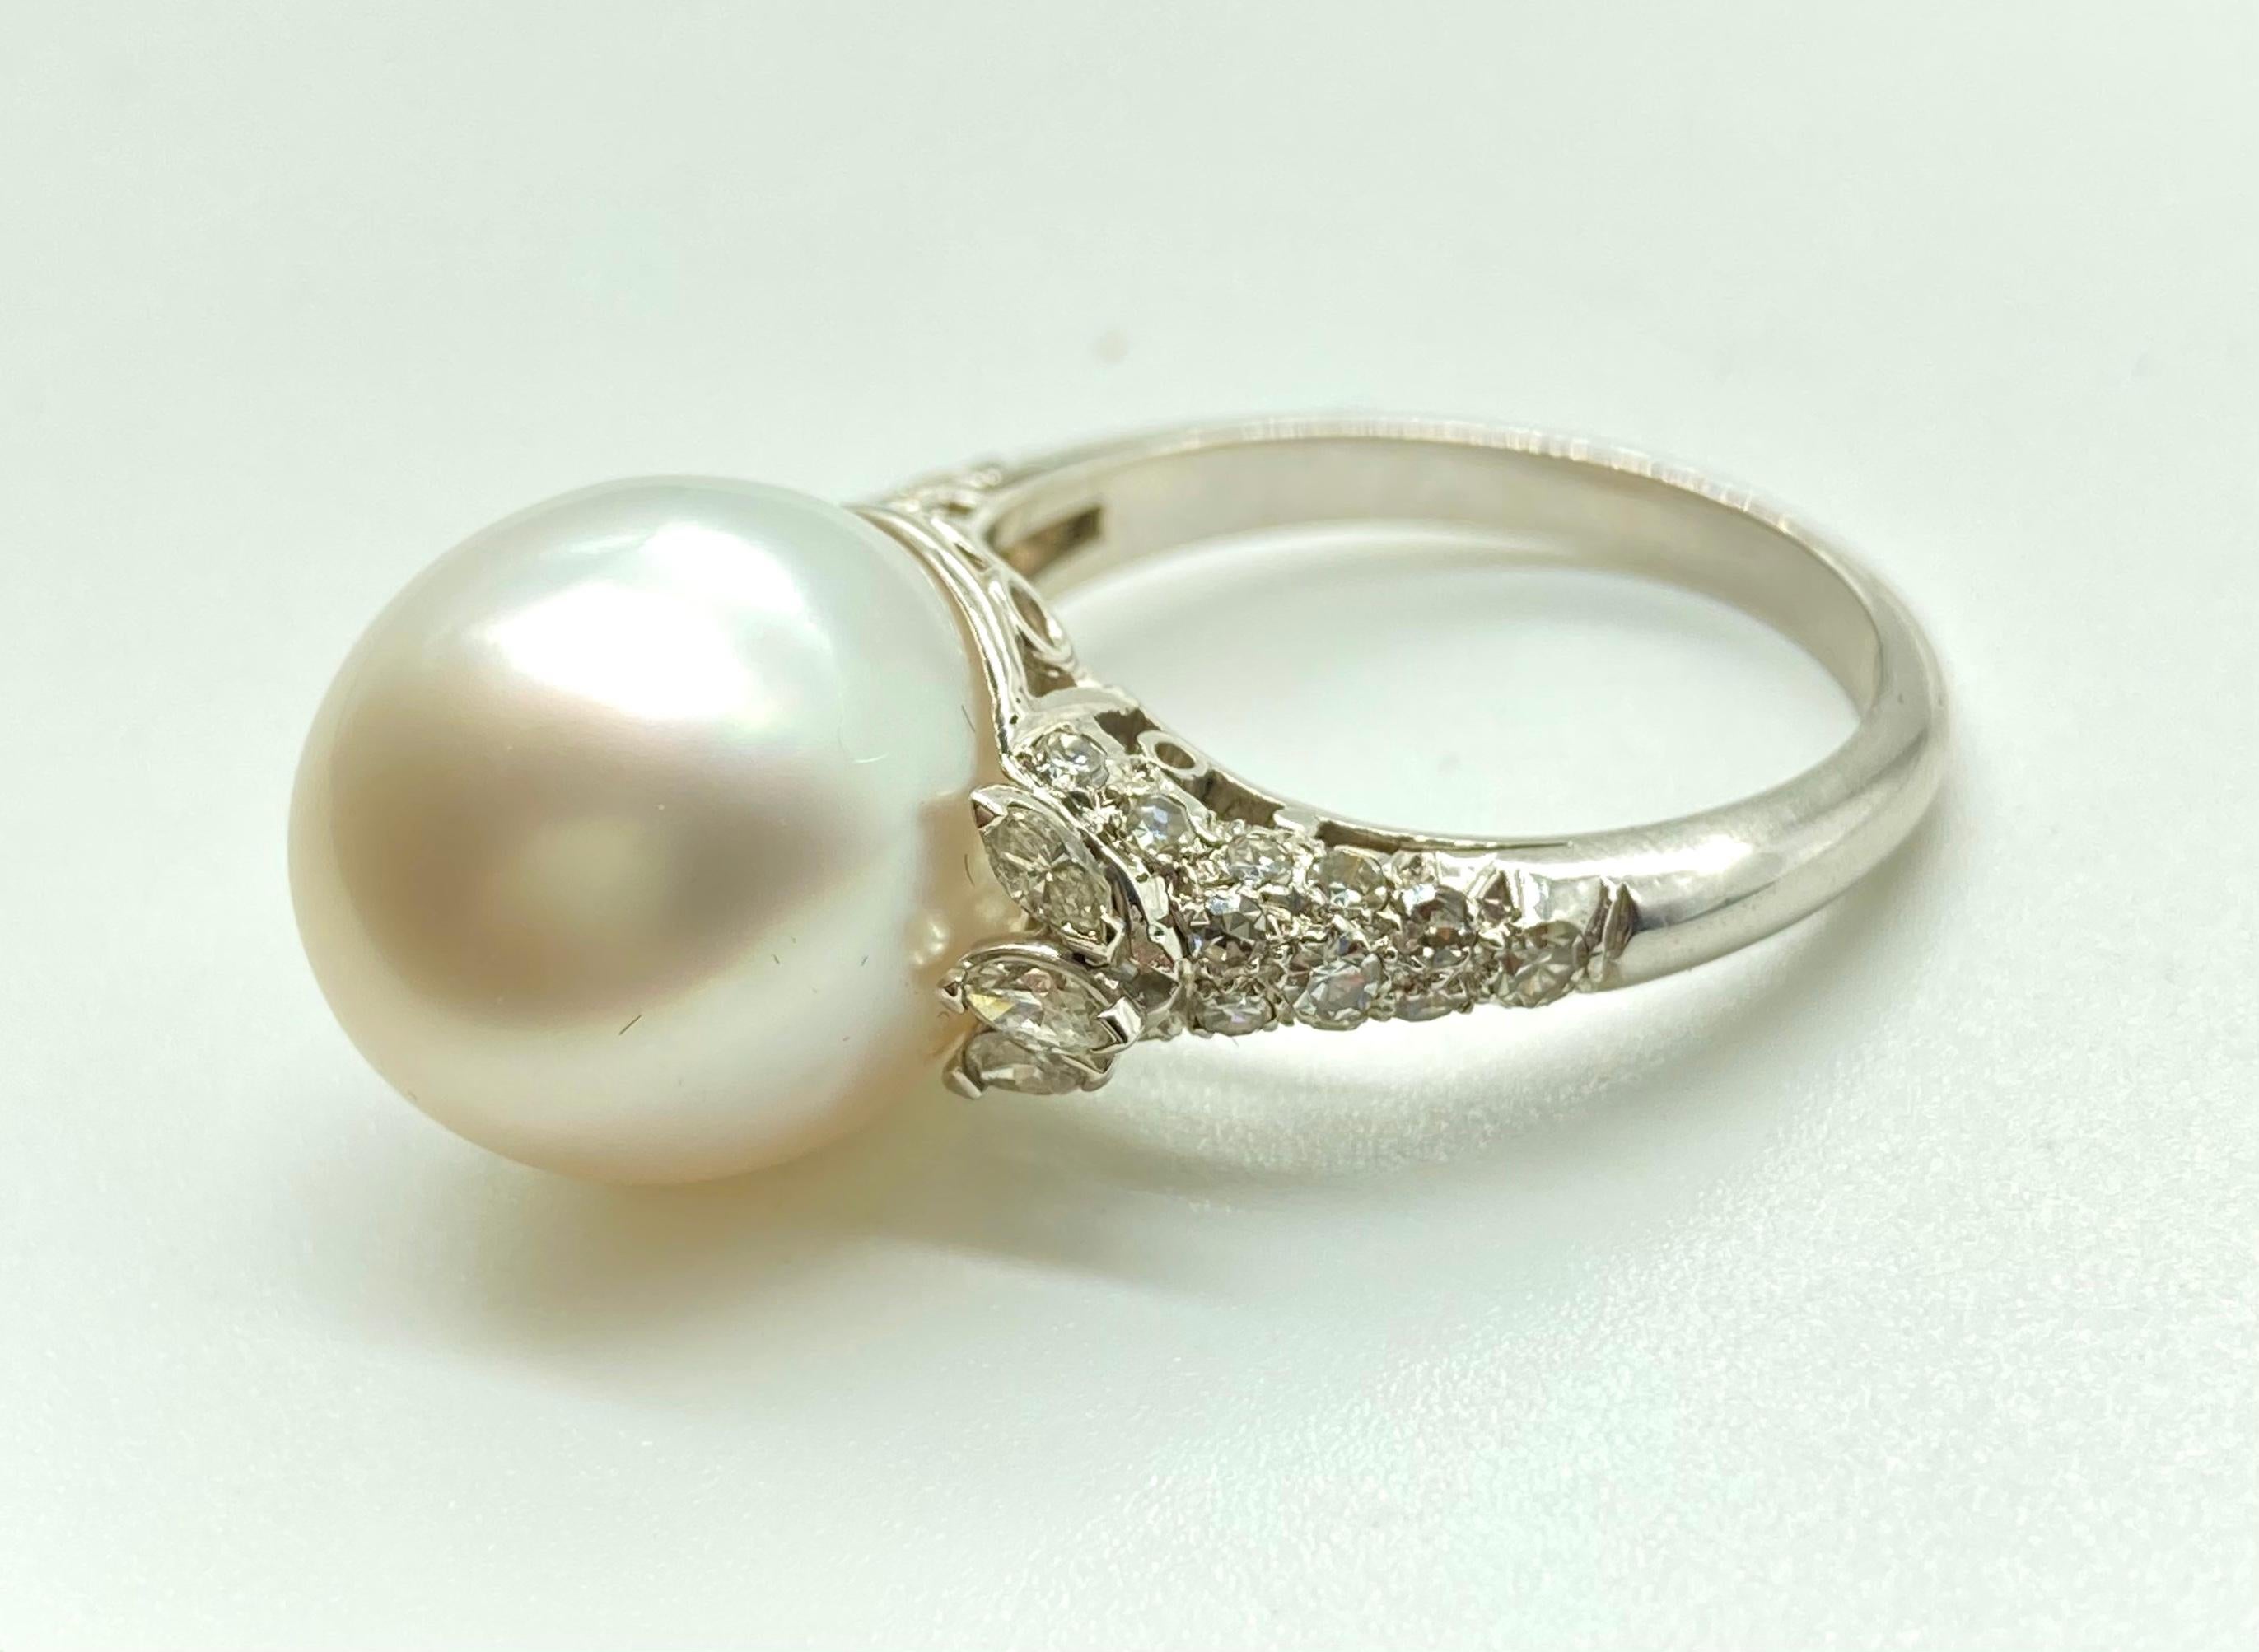 A beautiful white gold ring featuring a 15.7mm cultured pearl embellished with 0.60 carats of diamonds.